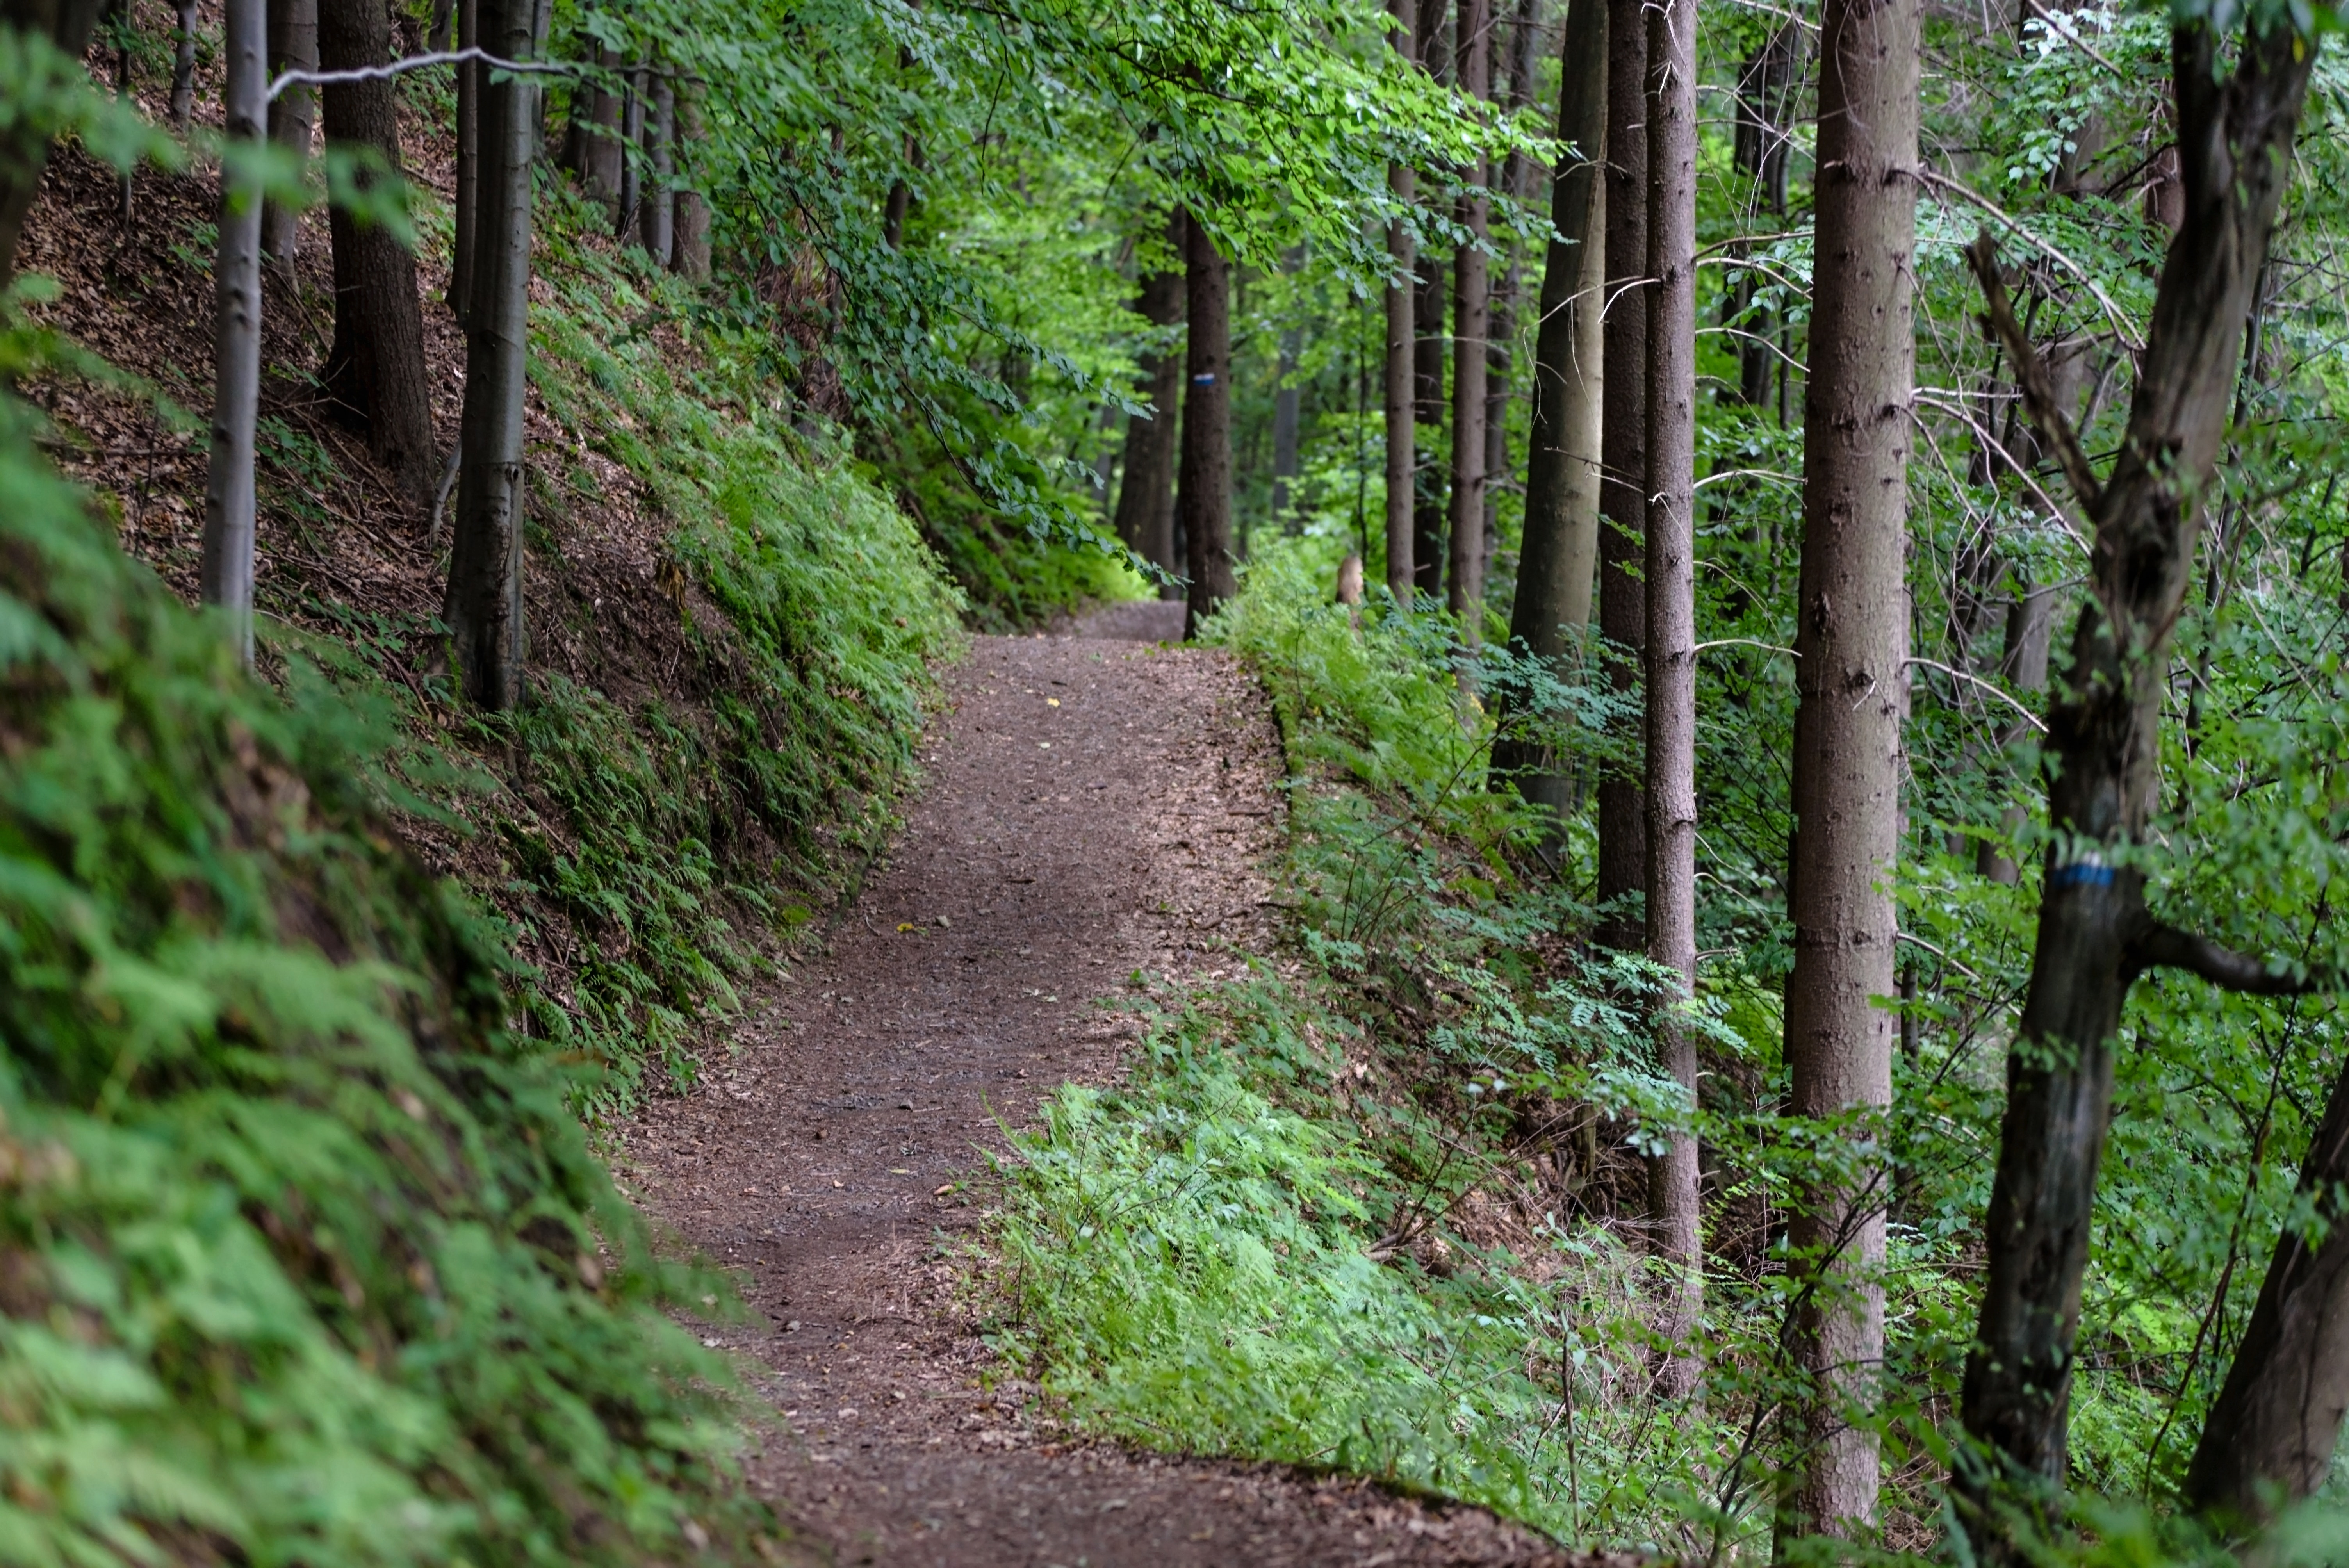 A dirt trail lined by tress on either side